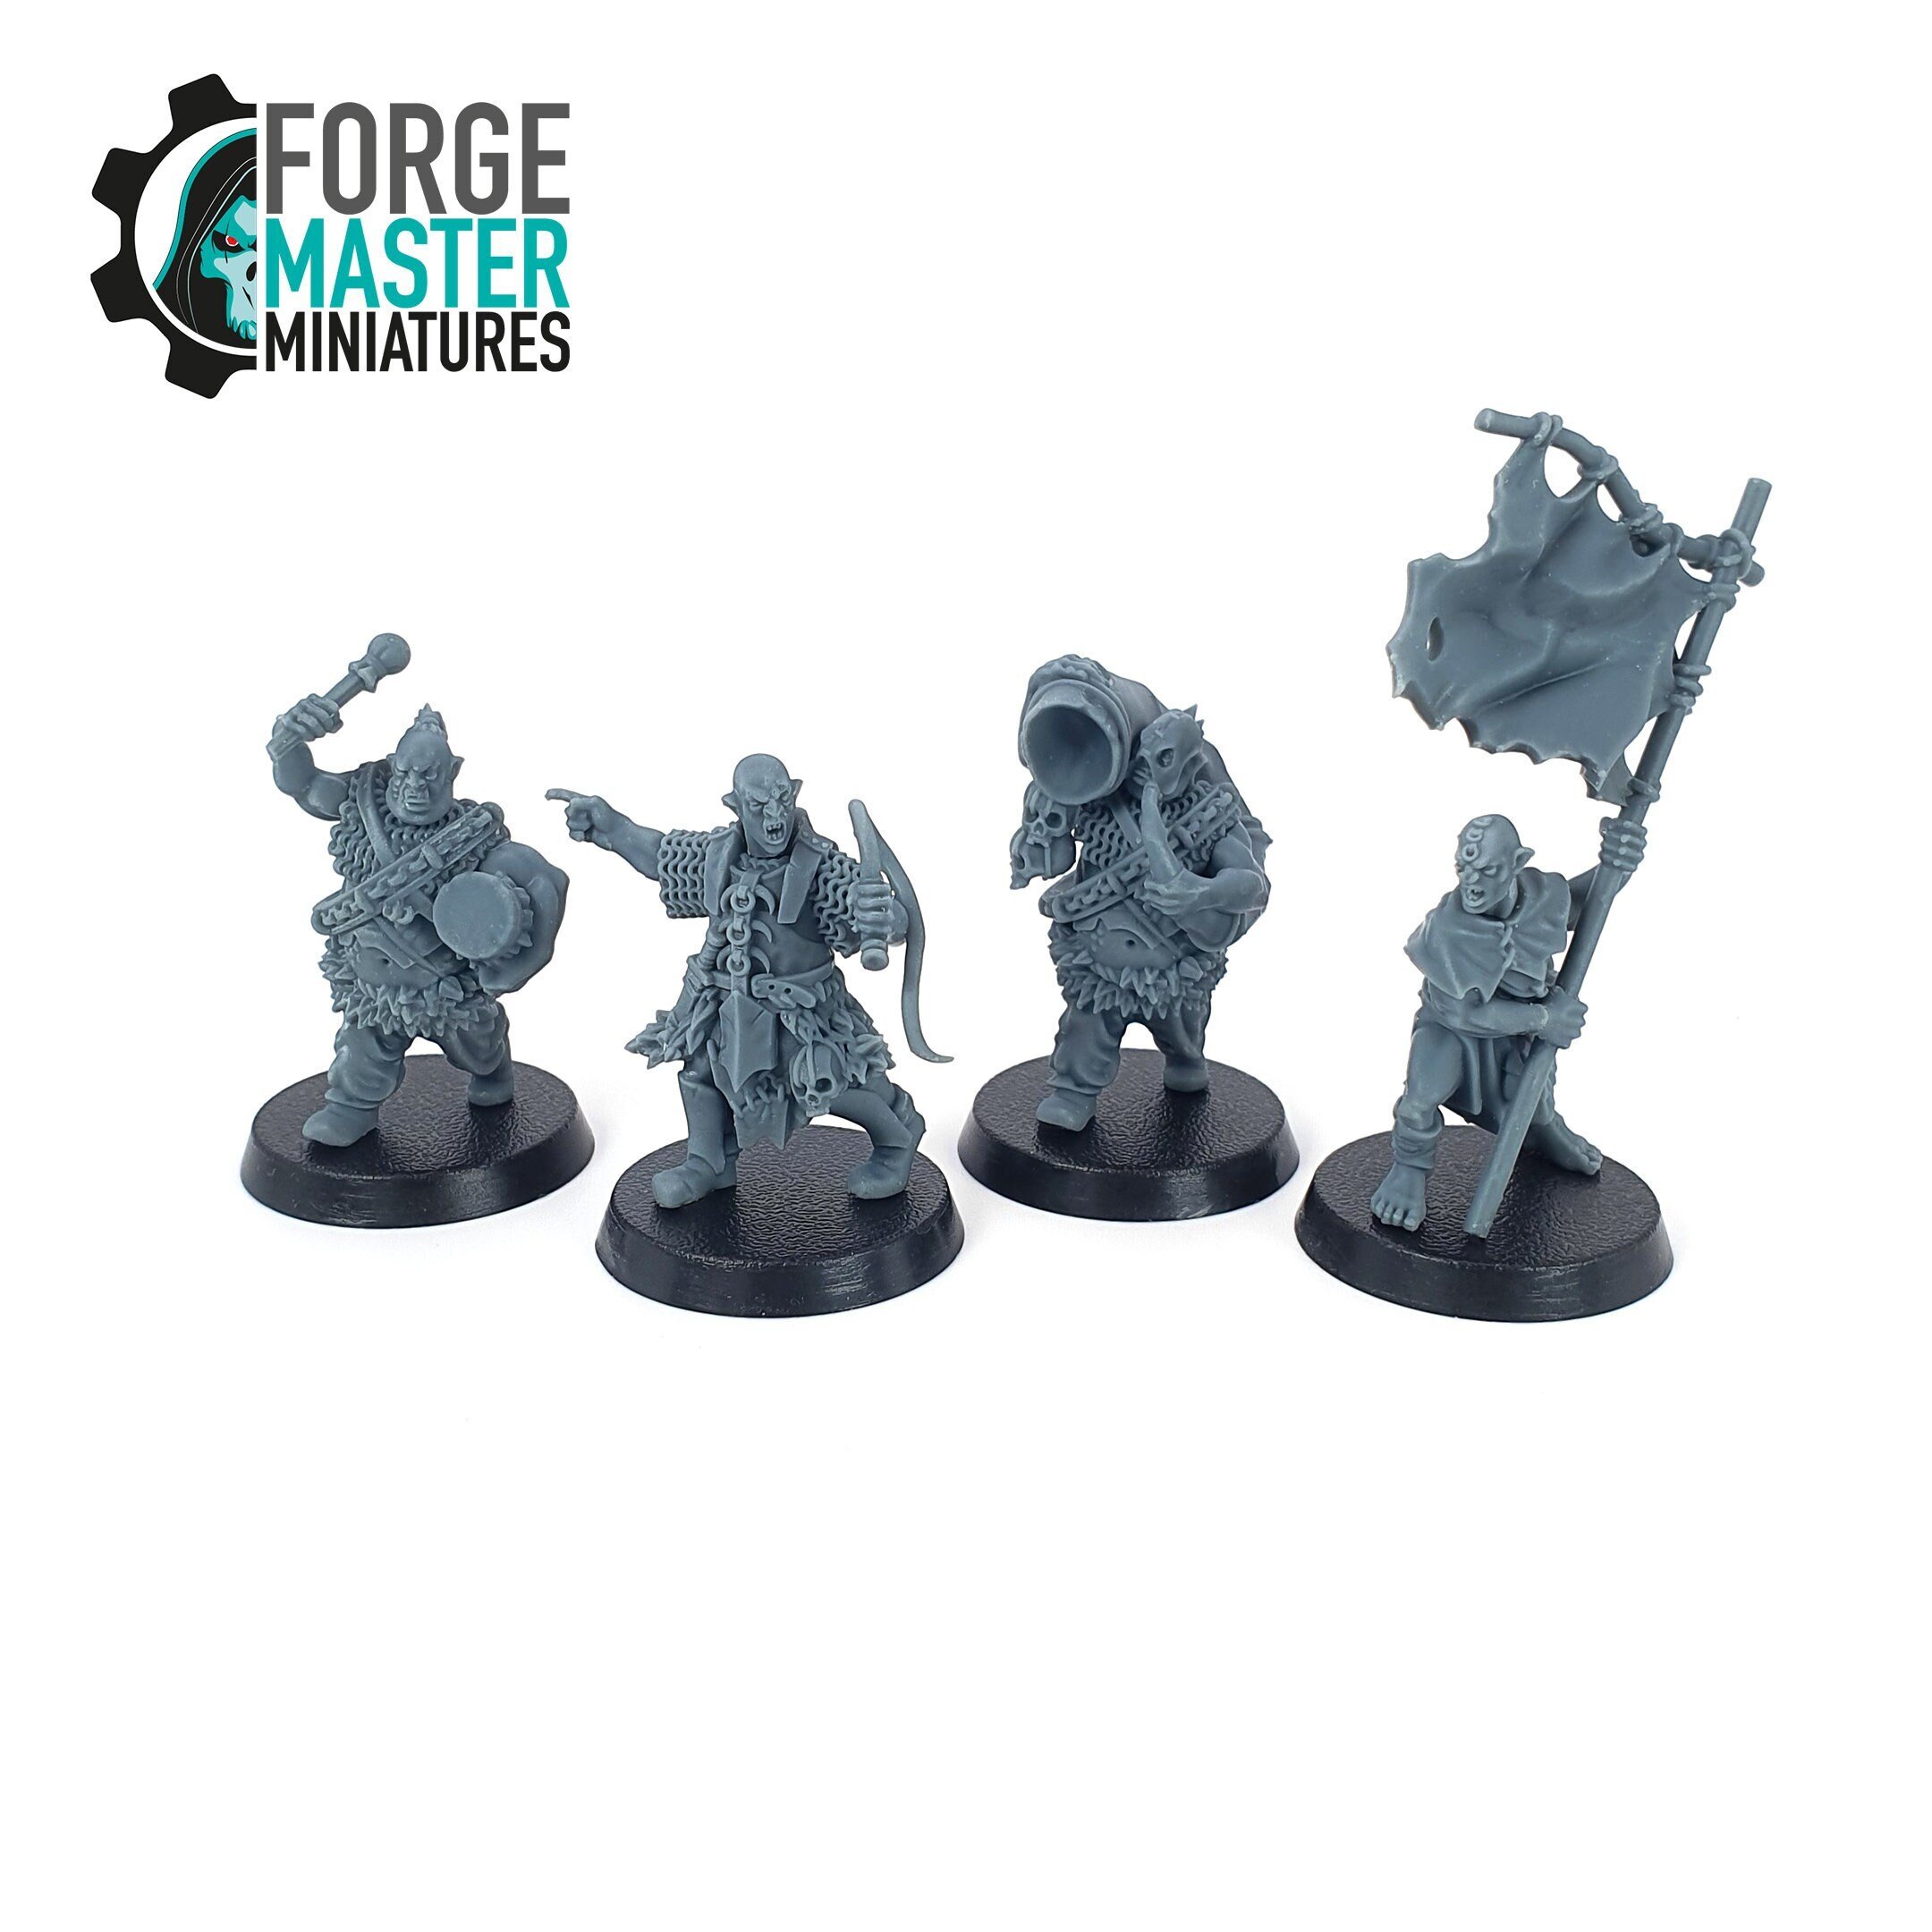 Minions of Darkness Commanders wargaming miniatures by Unreleased Miniatures 3D Printed by Forgemaster Miniatures